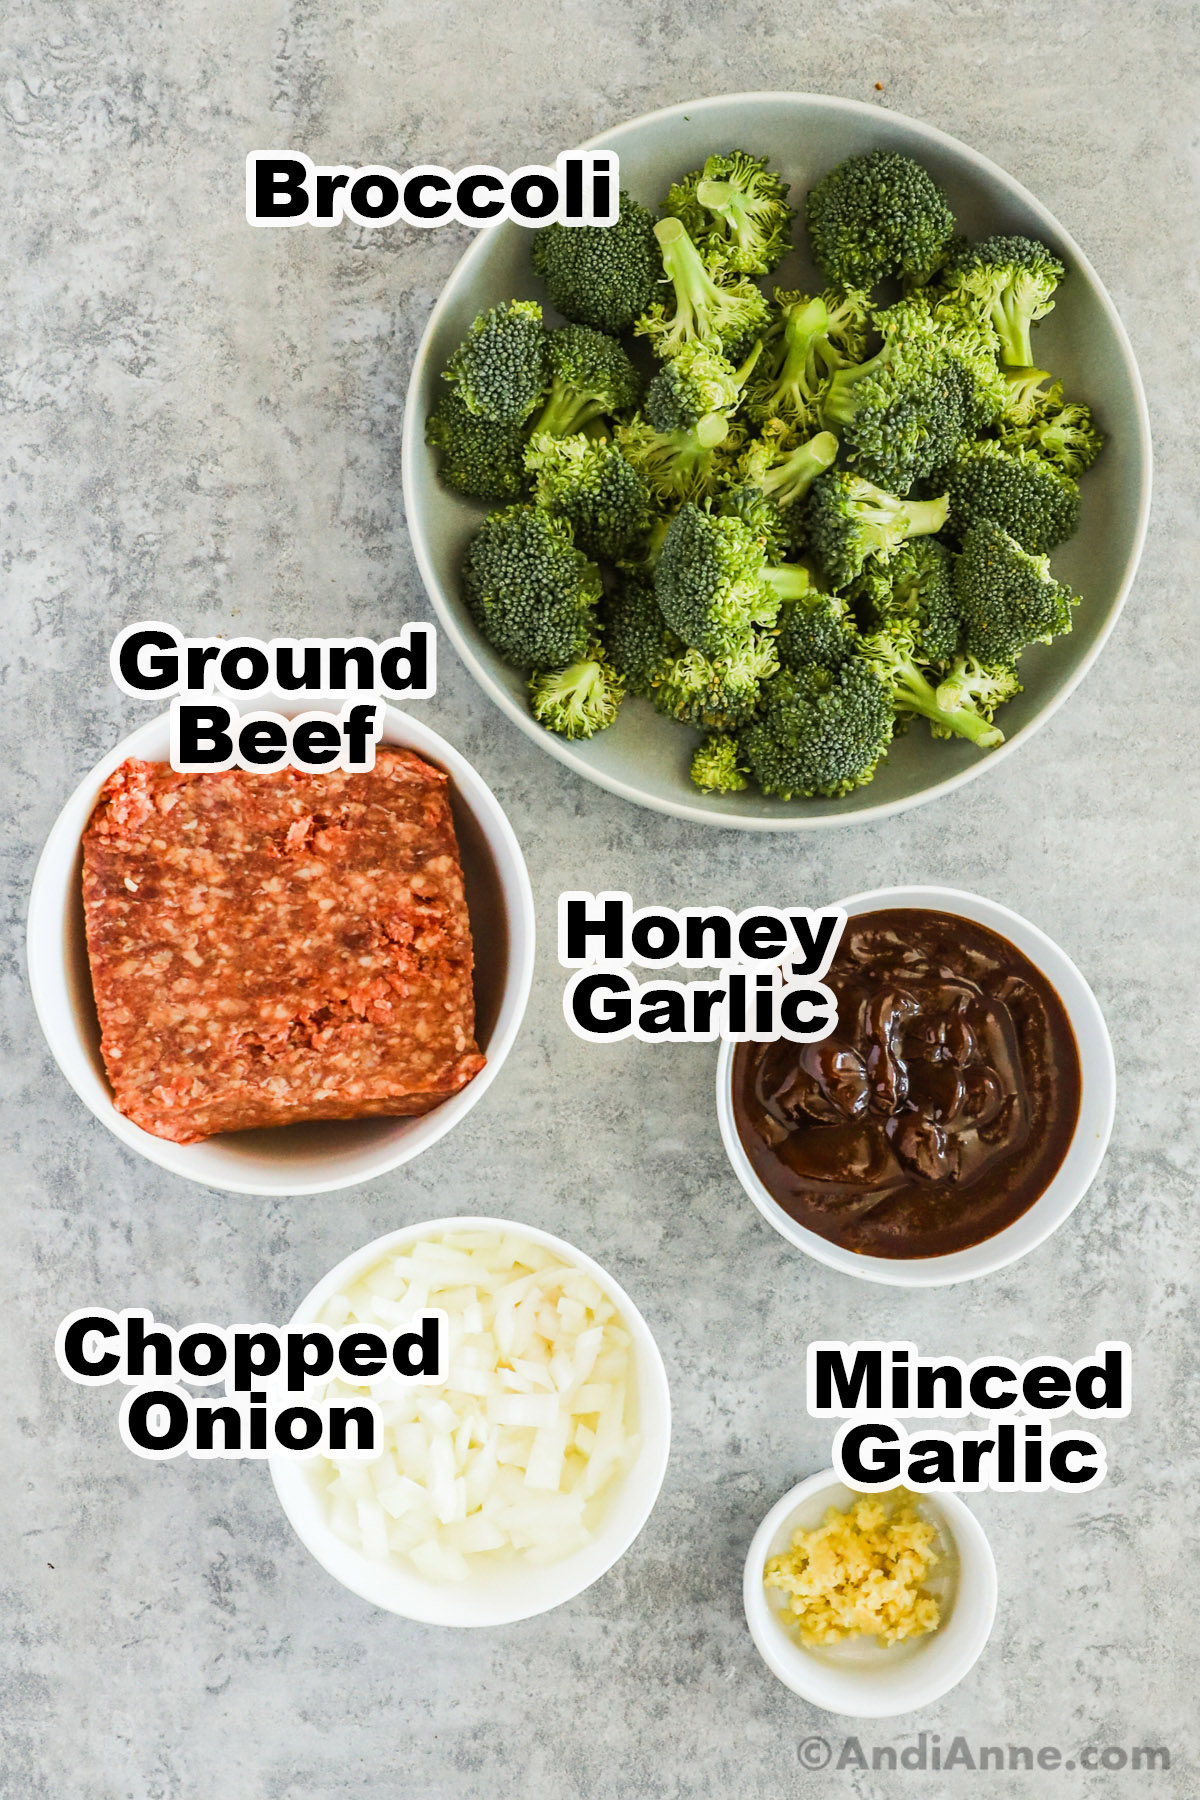 Recipe ingredients in bowls including broccoli florets, ground beef, honey garlic sauce, chopped onion, and minced garlic.